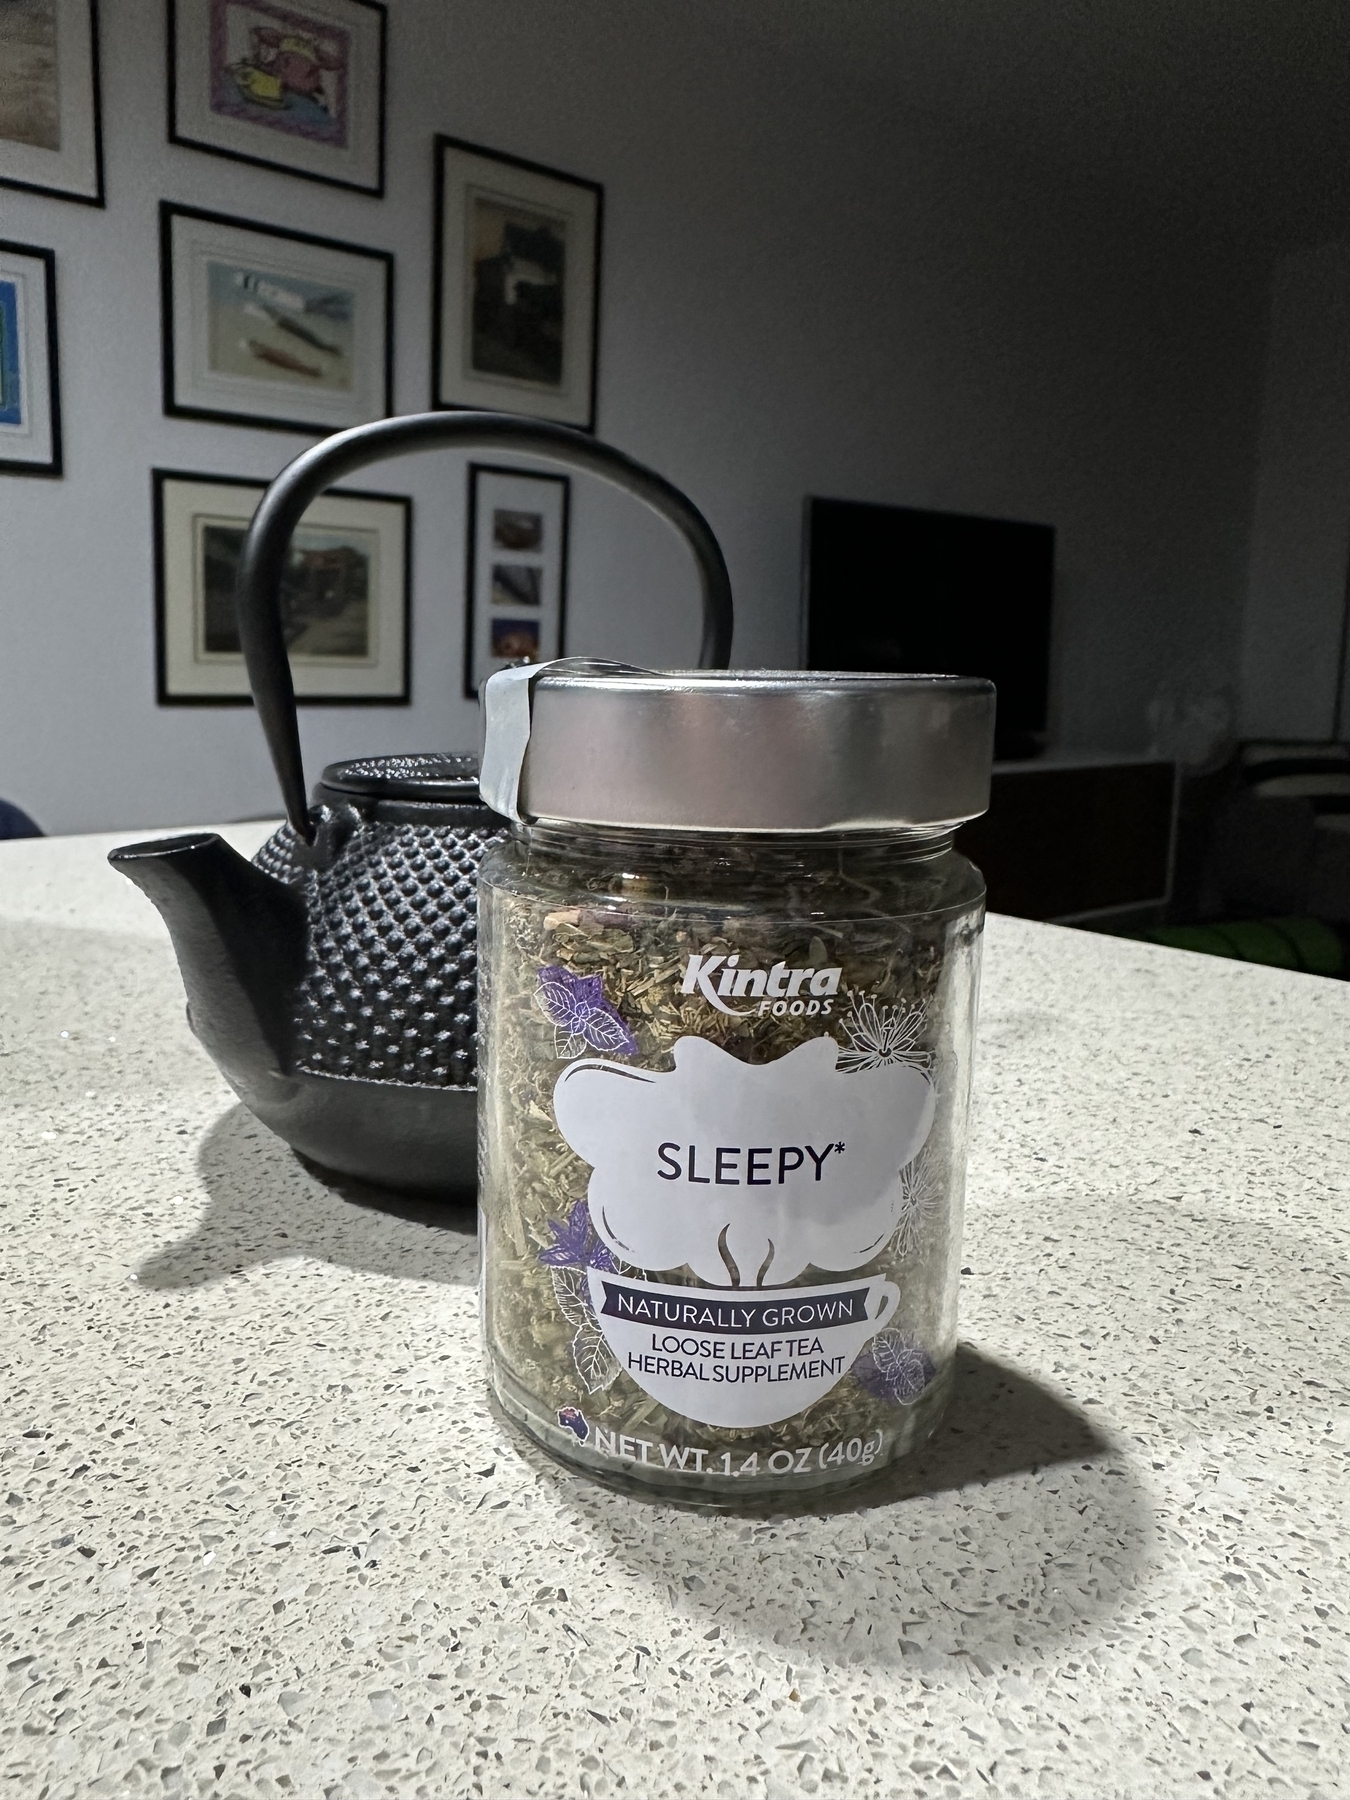 A glass jar of herbal tea sitting in front of a black teapot on a kitchen bench. The tea is “Sleepy” by Kintra Foods.